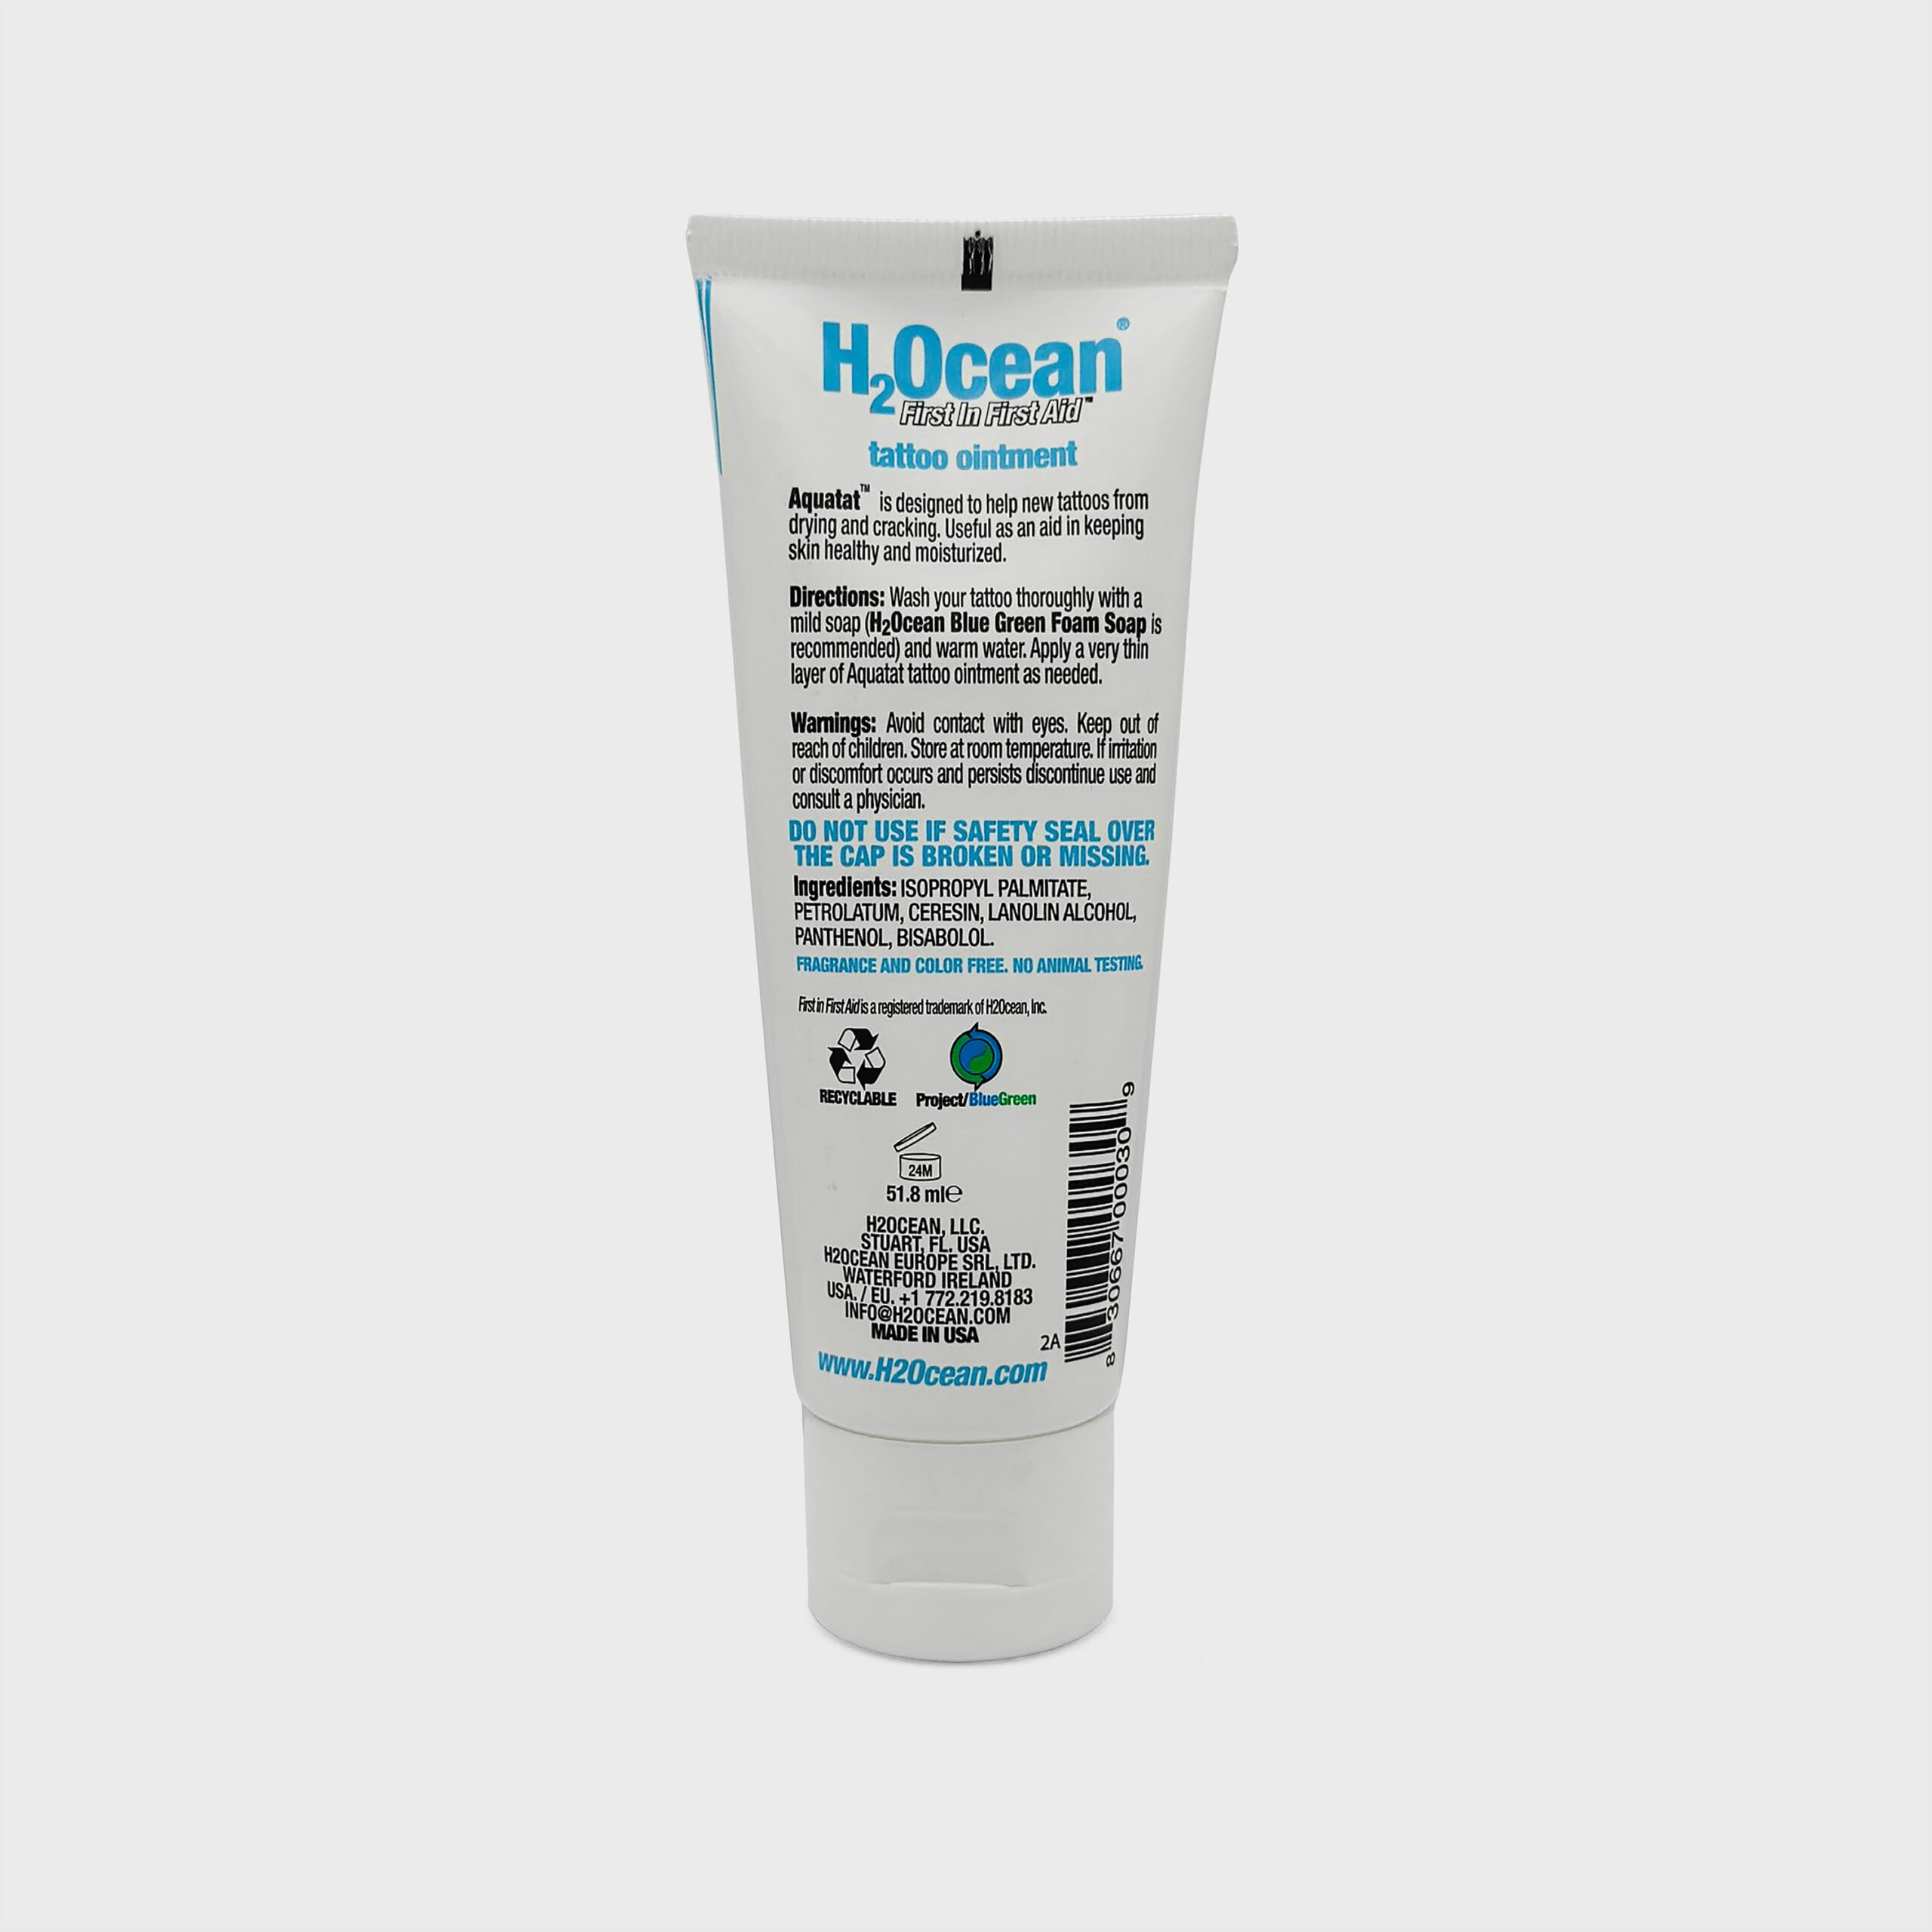 H2Ocean Extreme Tattoo Care Complete Tattoo Aftercare Kit For Hard to Heal Tattoos, Including All Natural Moisturizing Blue Green Soap, Healing Aquatat Ointment, & Moisturizing Care Cream